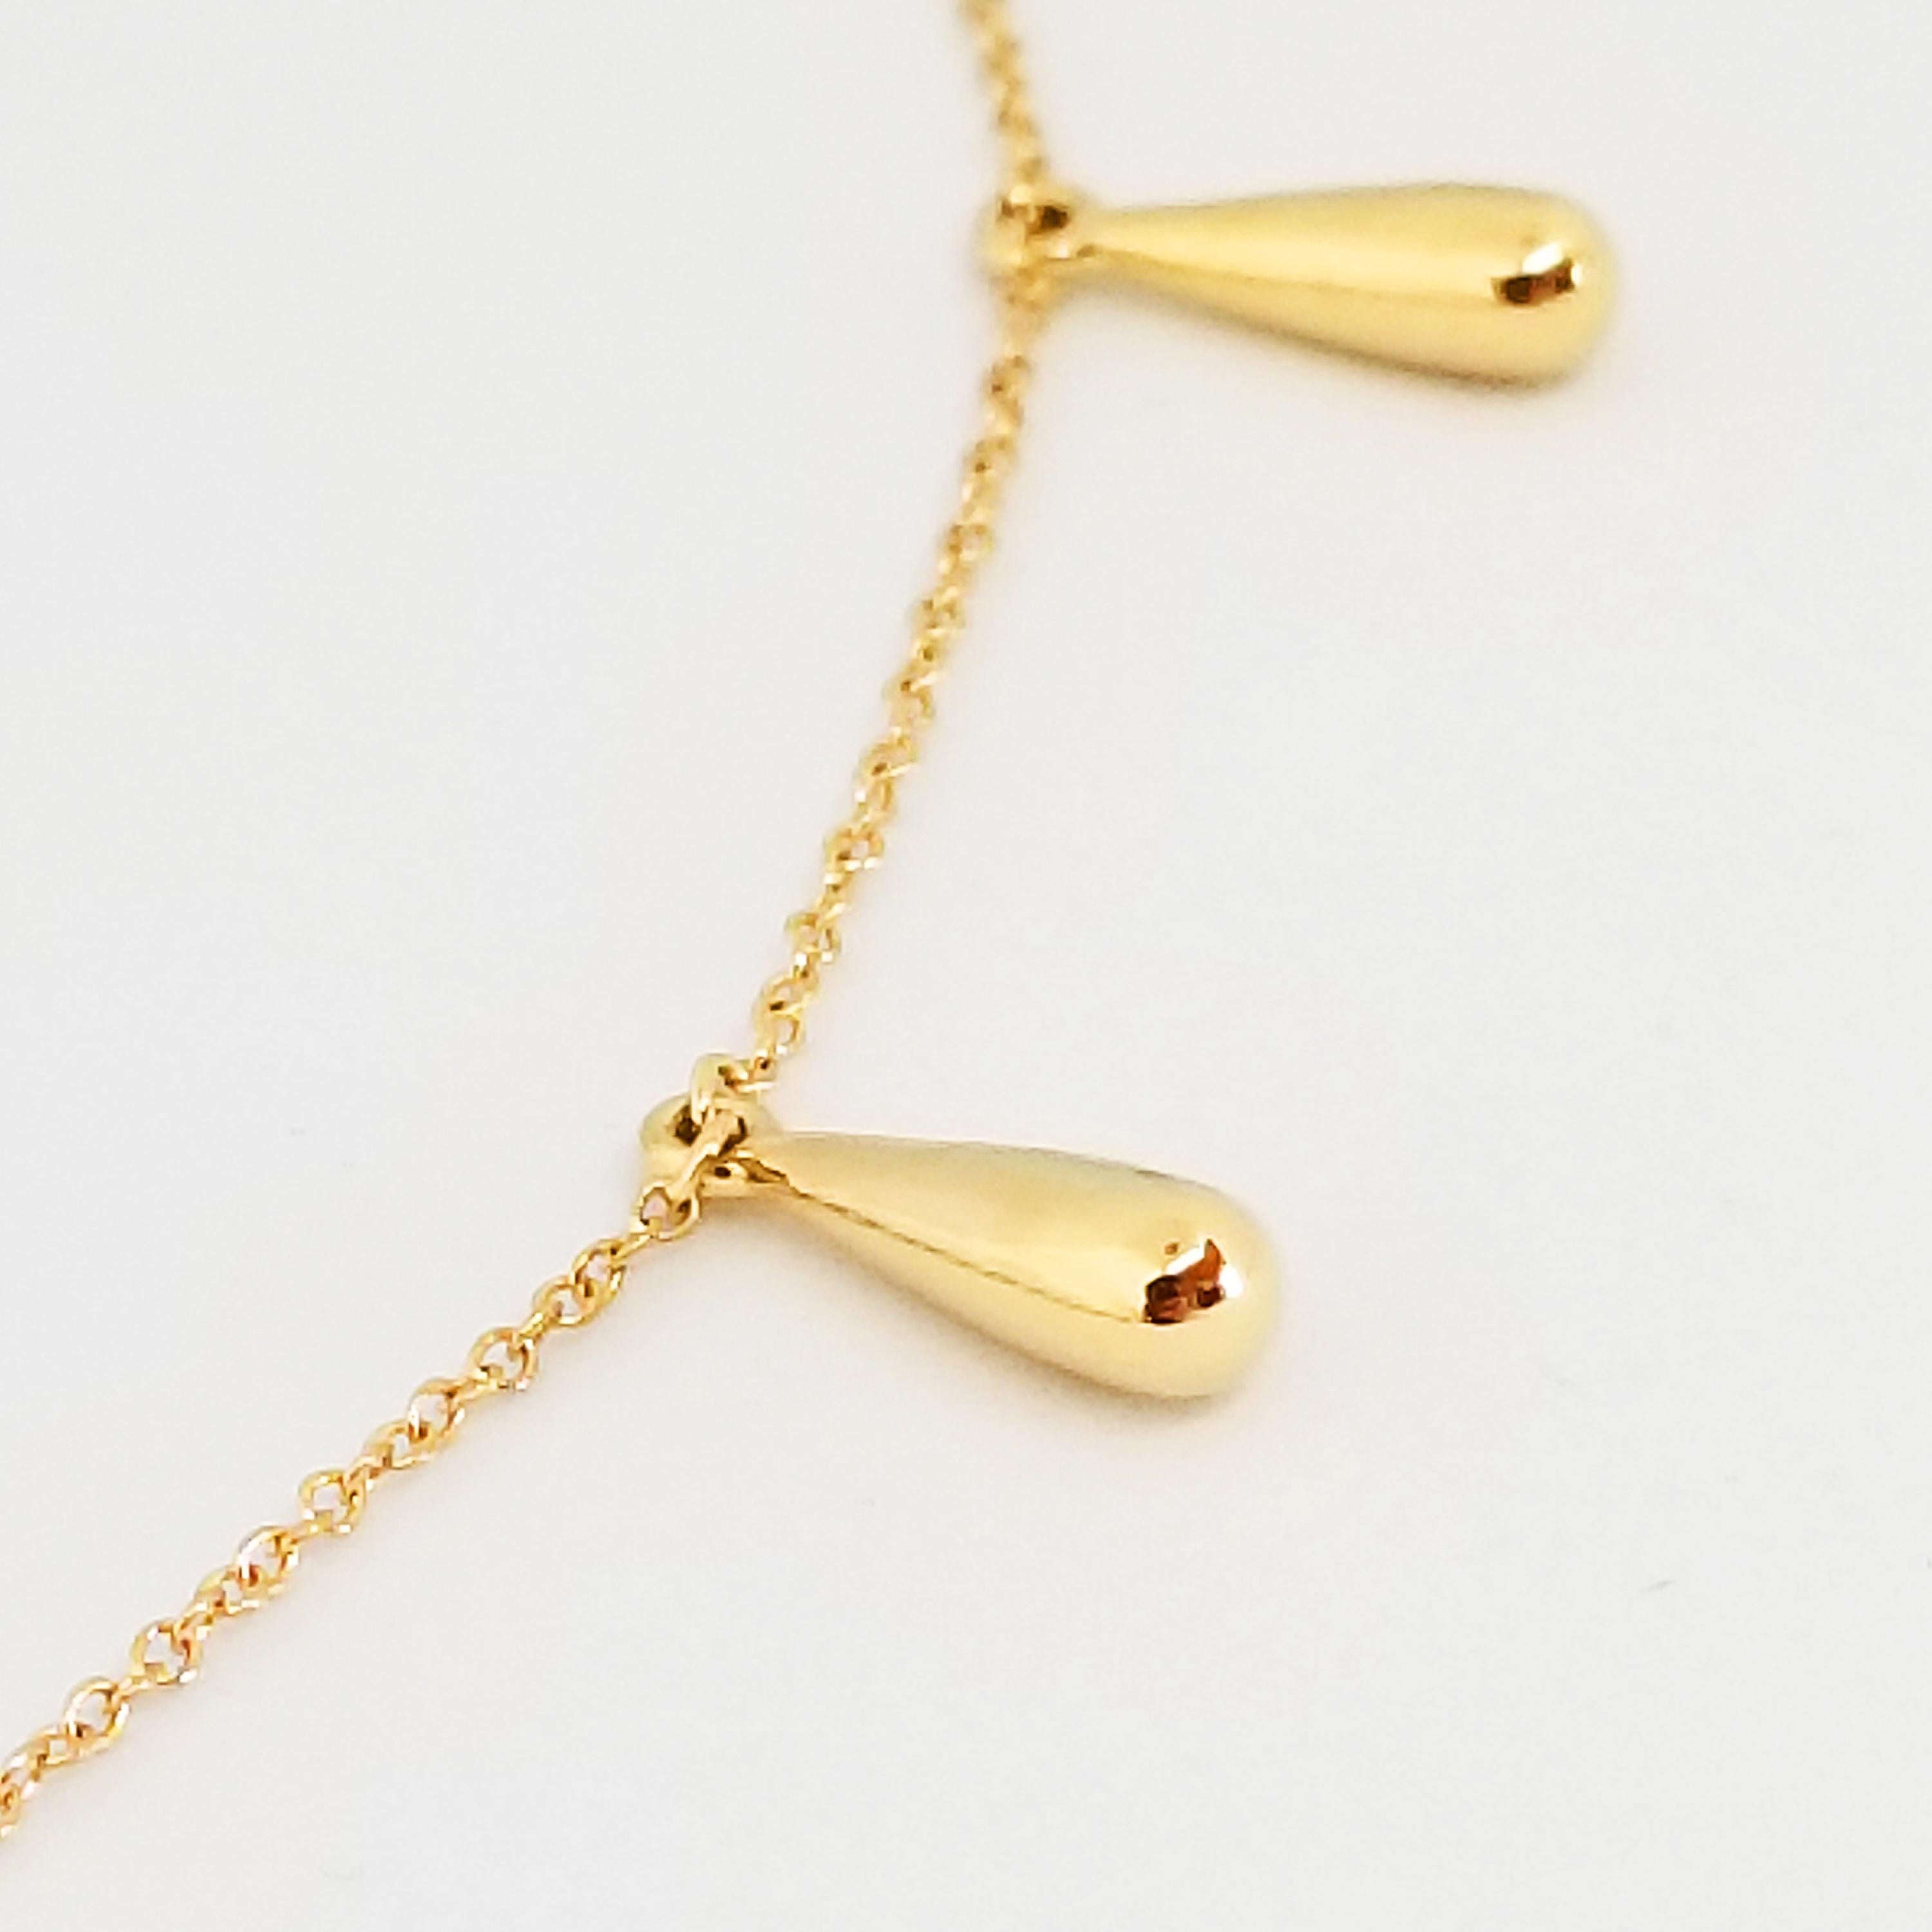 
Classic and simple describes this 14 Karat Highly Polished Yellow Gold Chain Necklace. The Cable Chain features five 14 Karat Gold Tear Drops that are evenly spaced across the center of the neckline. Each Droplet is linked to the chain for proper